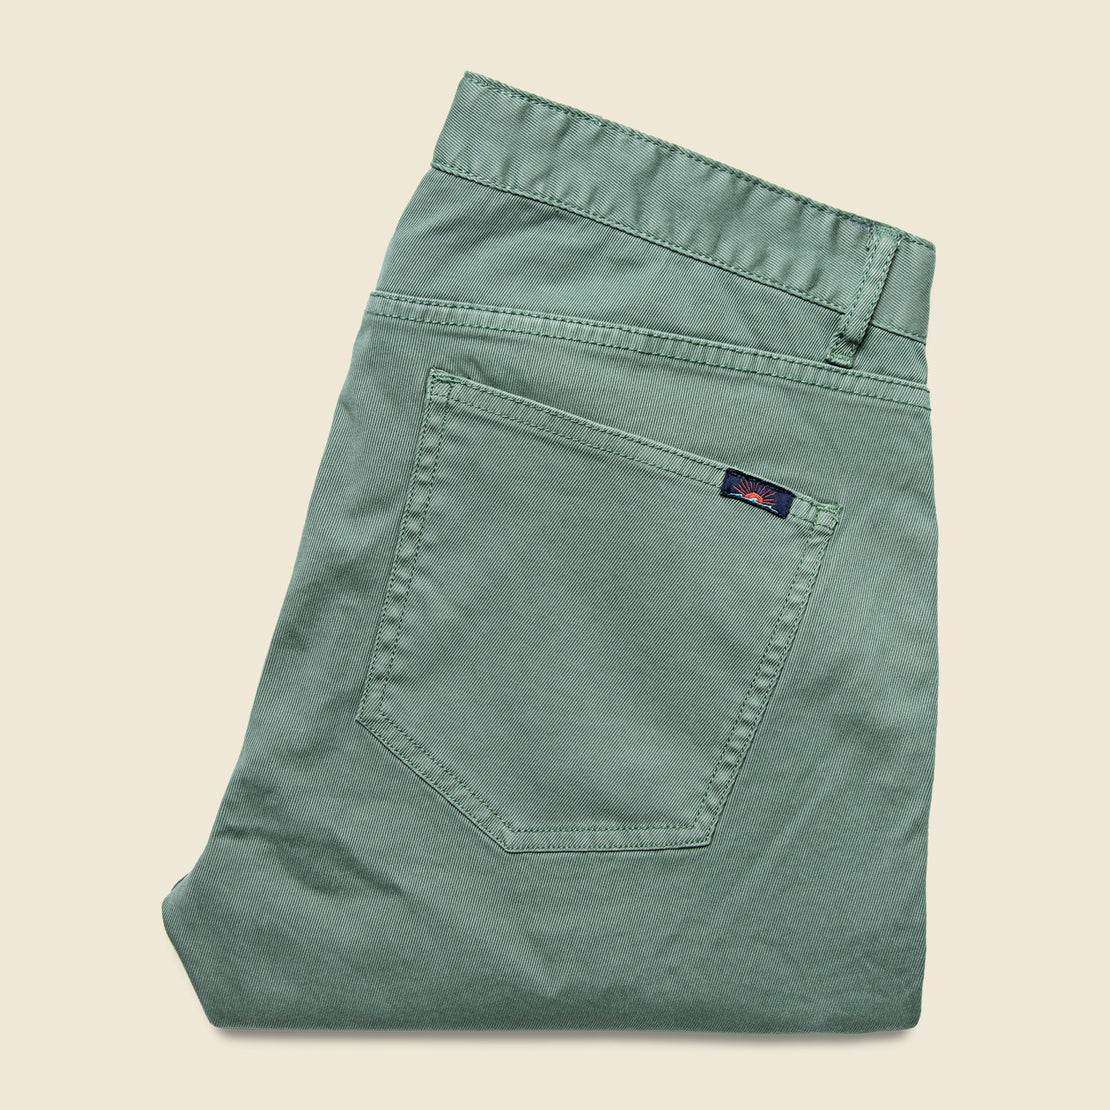 Cavalry Jean - Surplus Green - Faherty - STAG Provisions - Pants - Twill